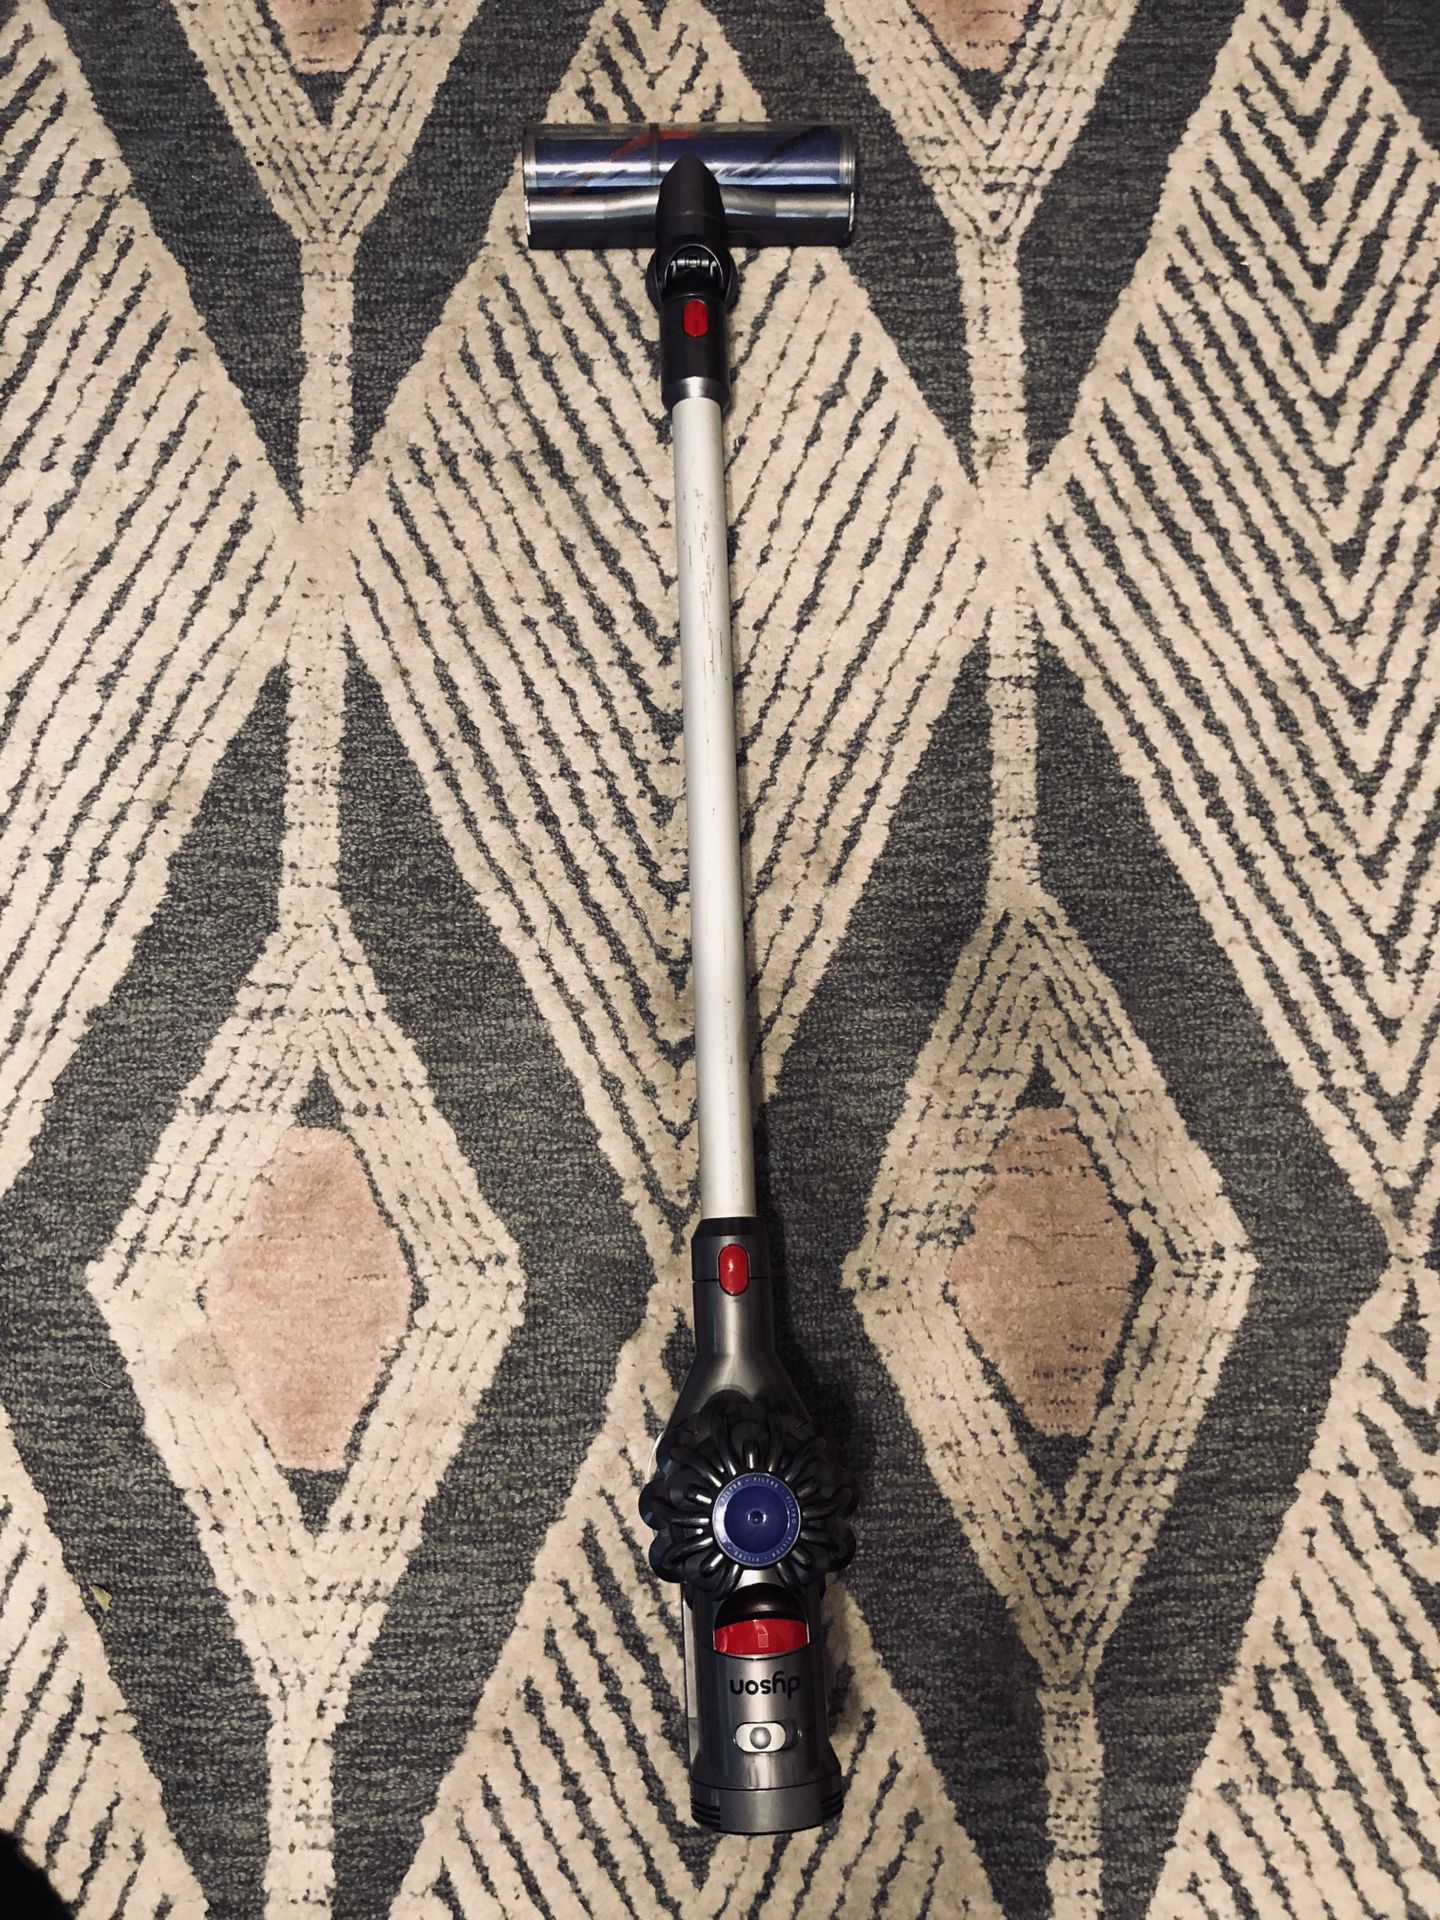 Dyson V7 Motorhead Origin cordless vacuum like new with charger